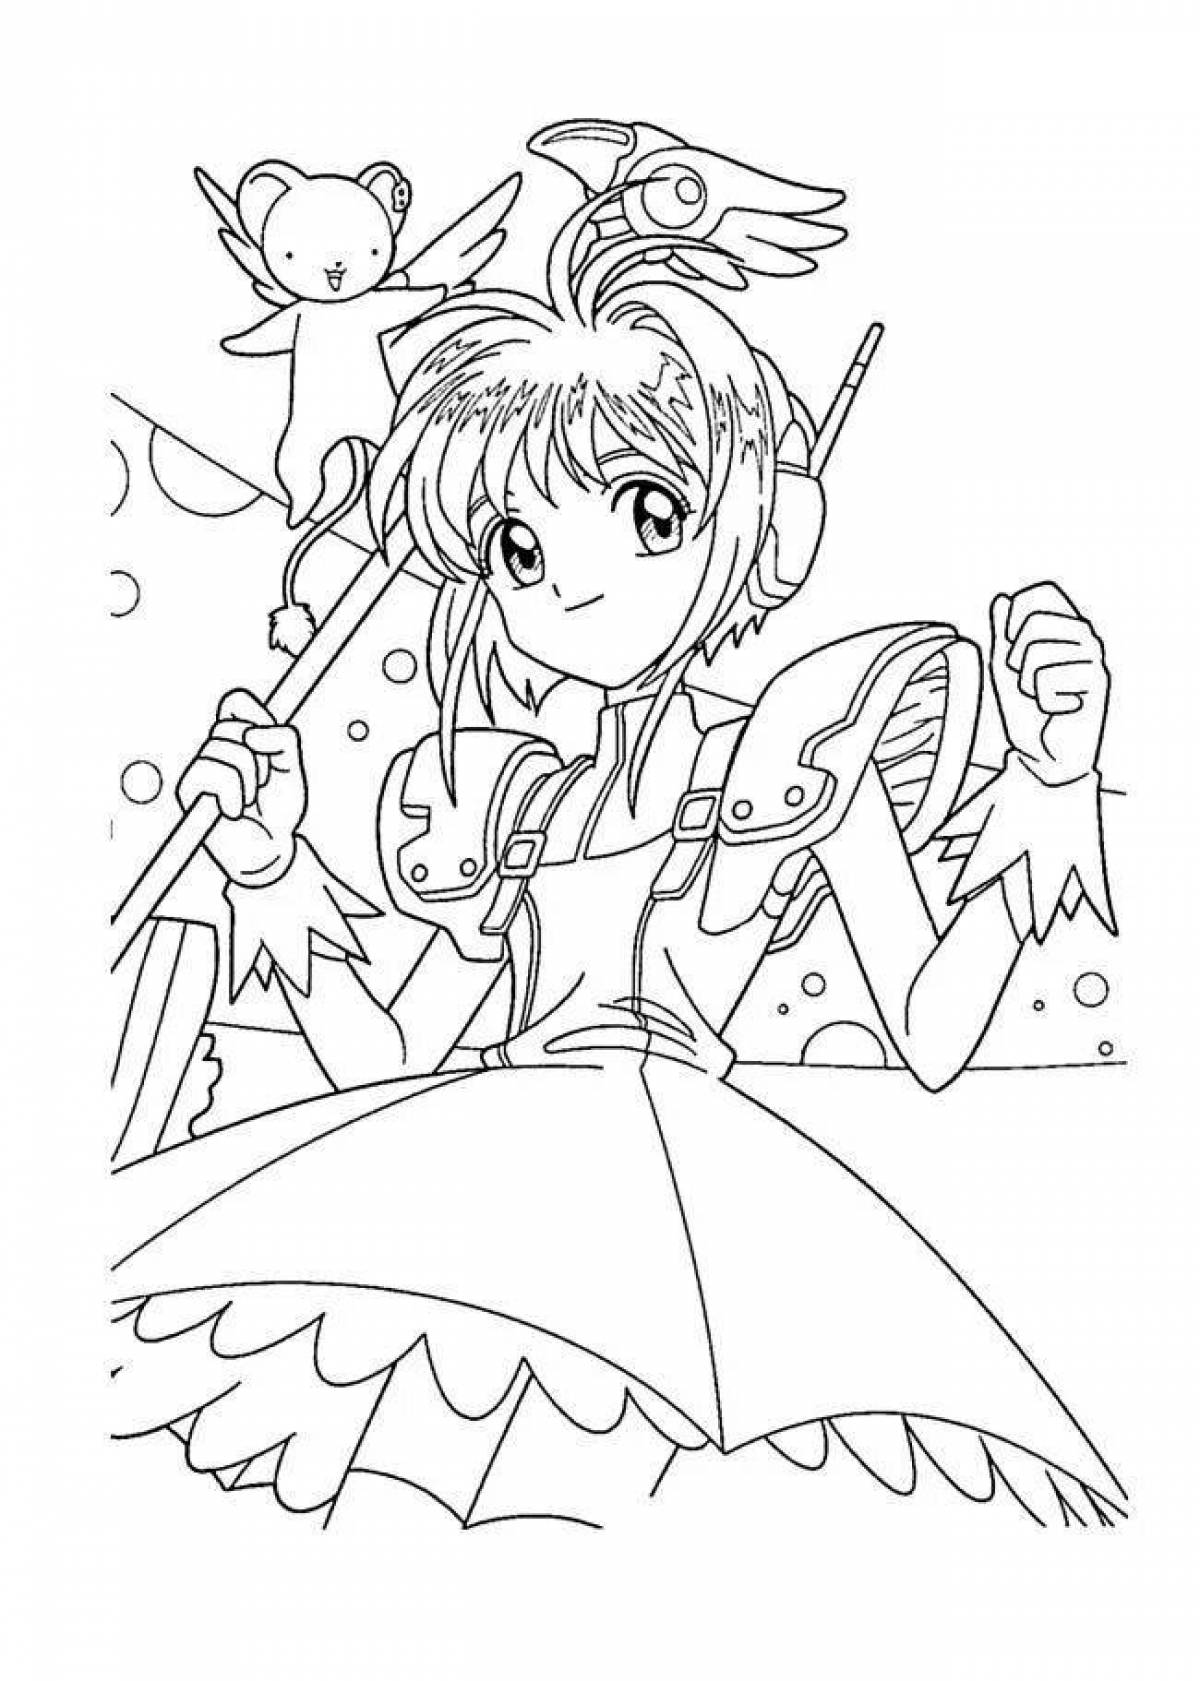 Exotic anime Christmas coloring book